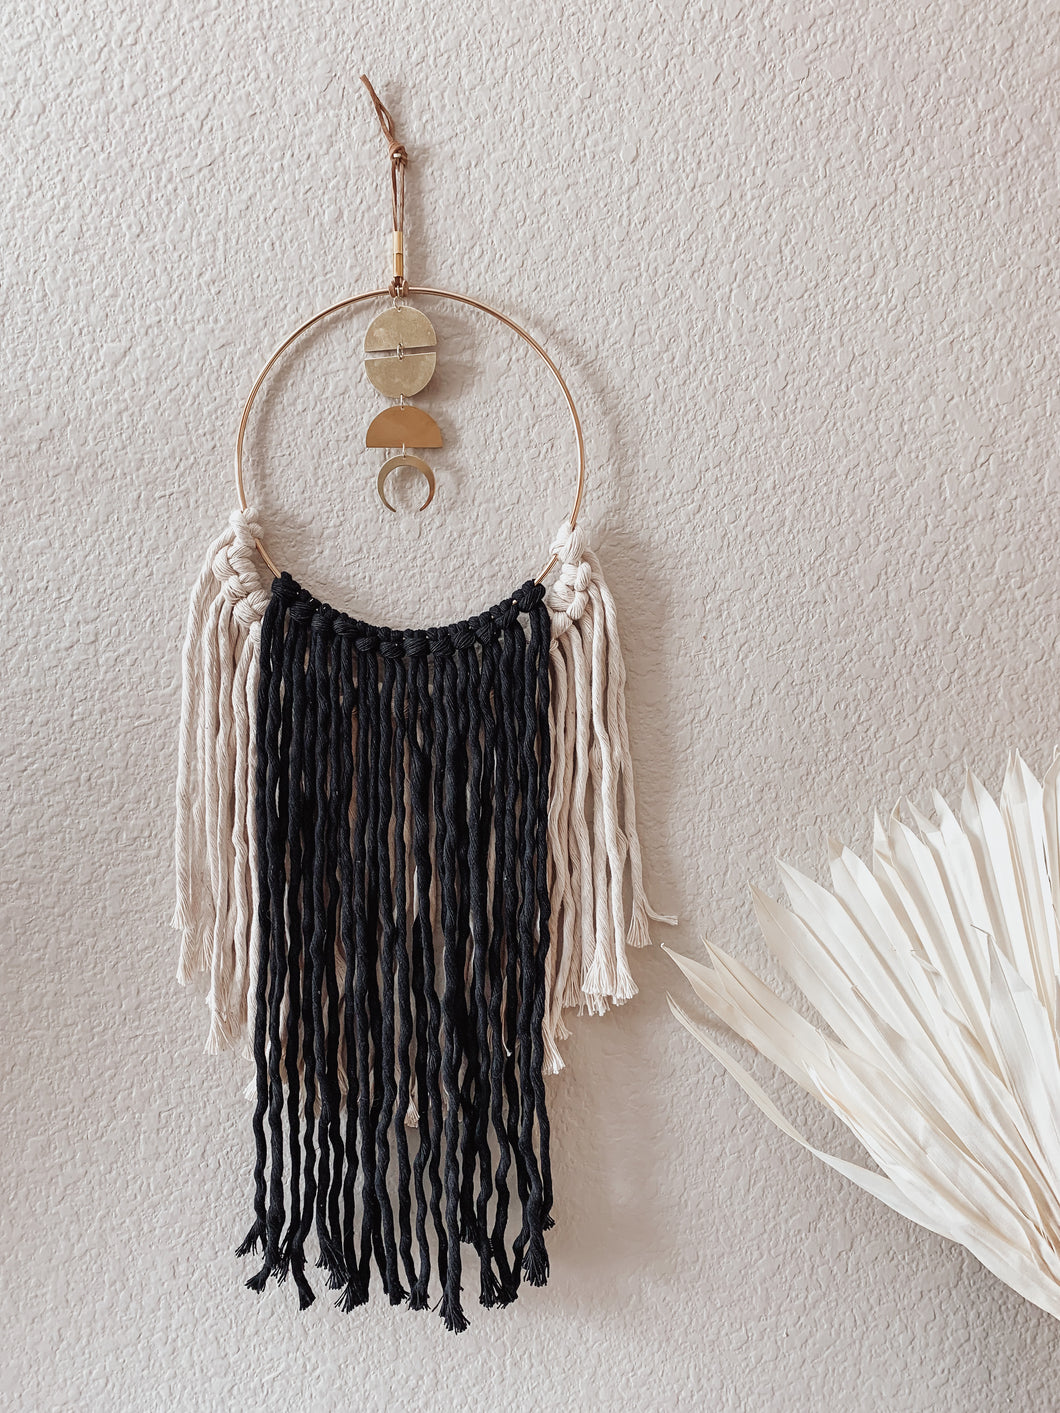 A macrame wall hanging with natural white and black colored fringe hand knotted on a gold ring with brass charms perfectly placed